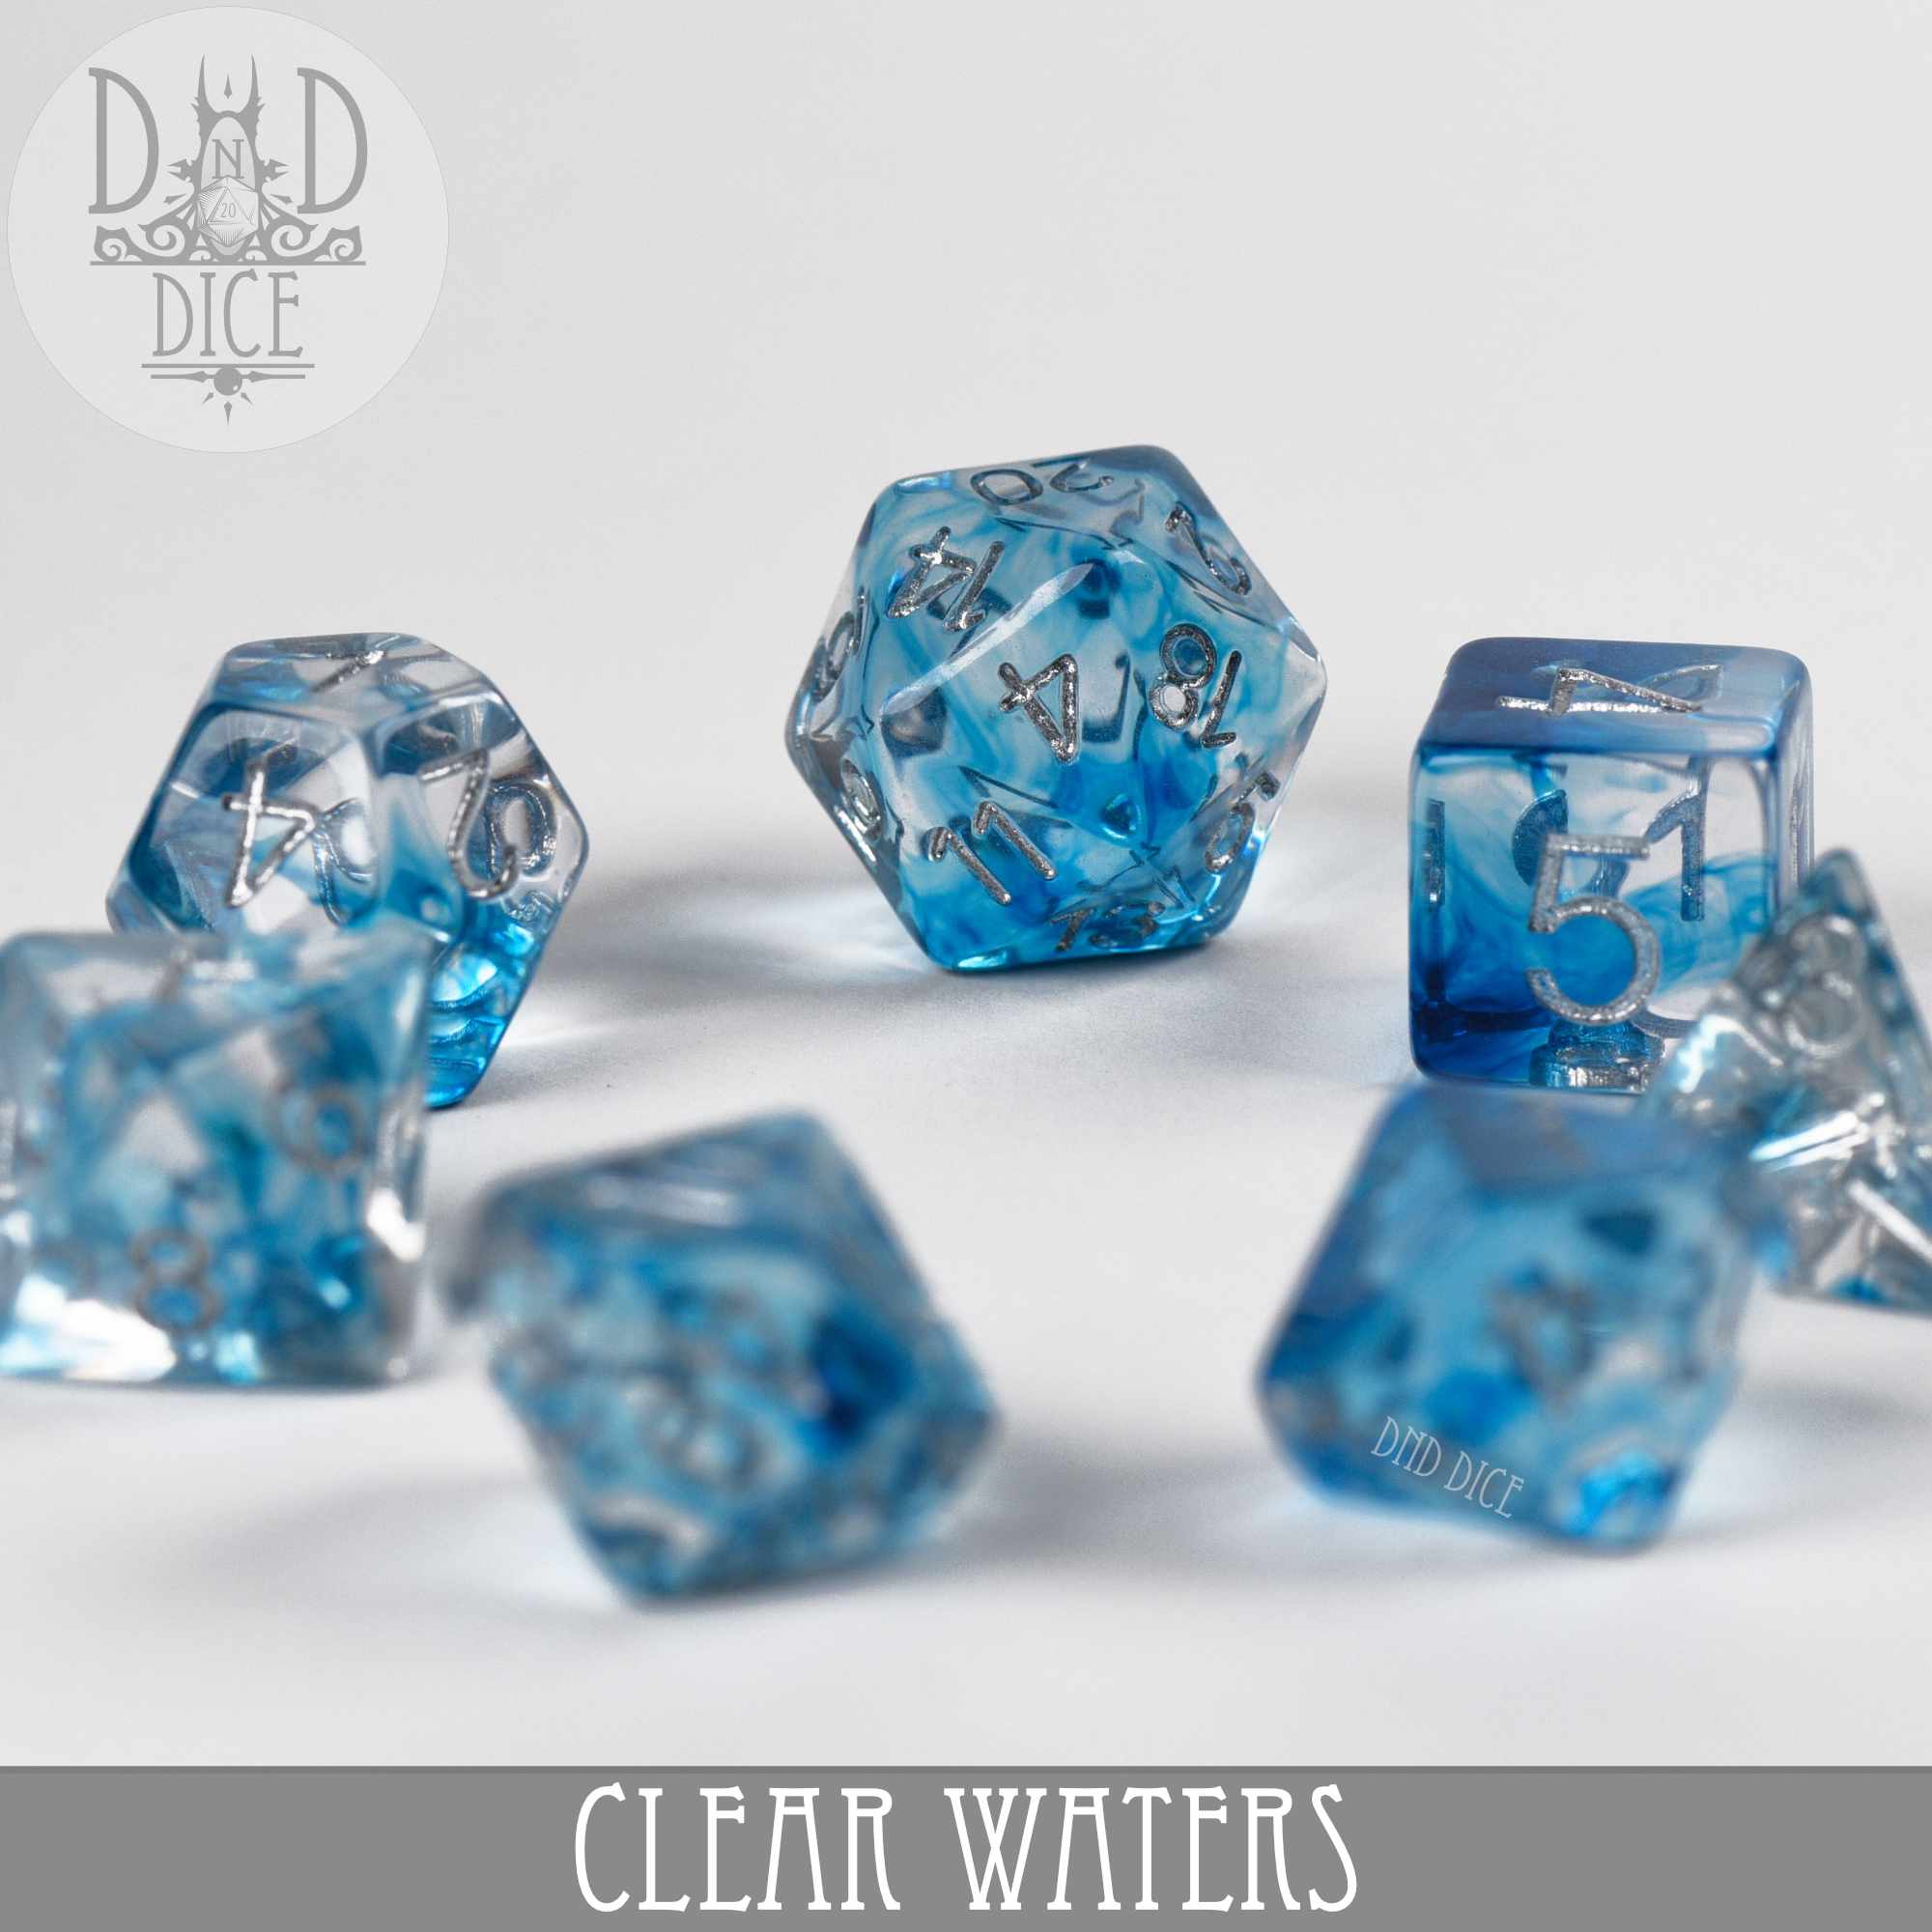 Clear Waters Dice Set